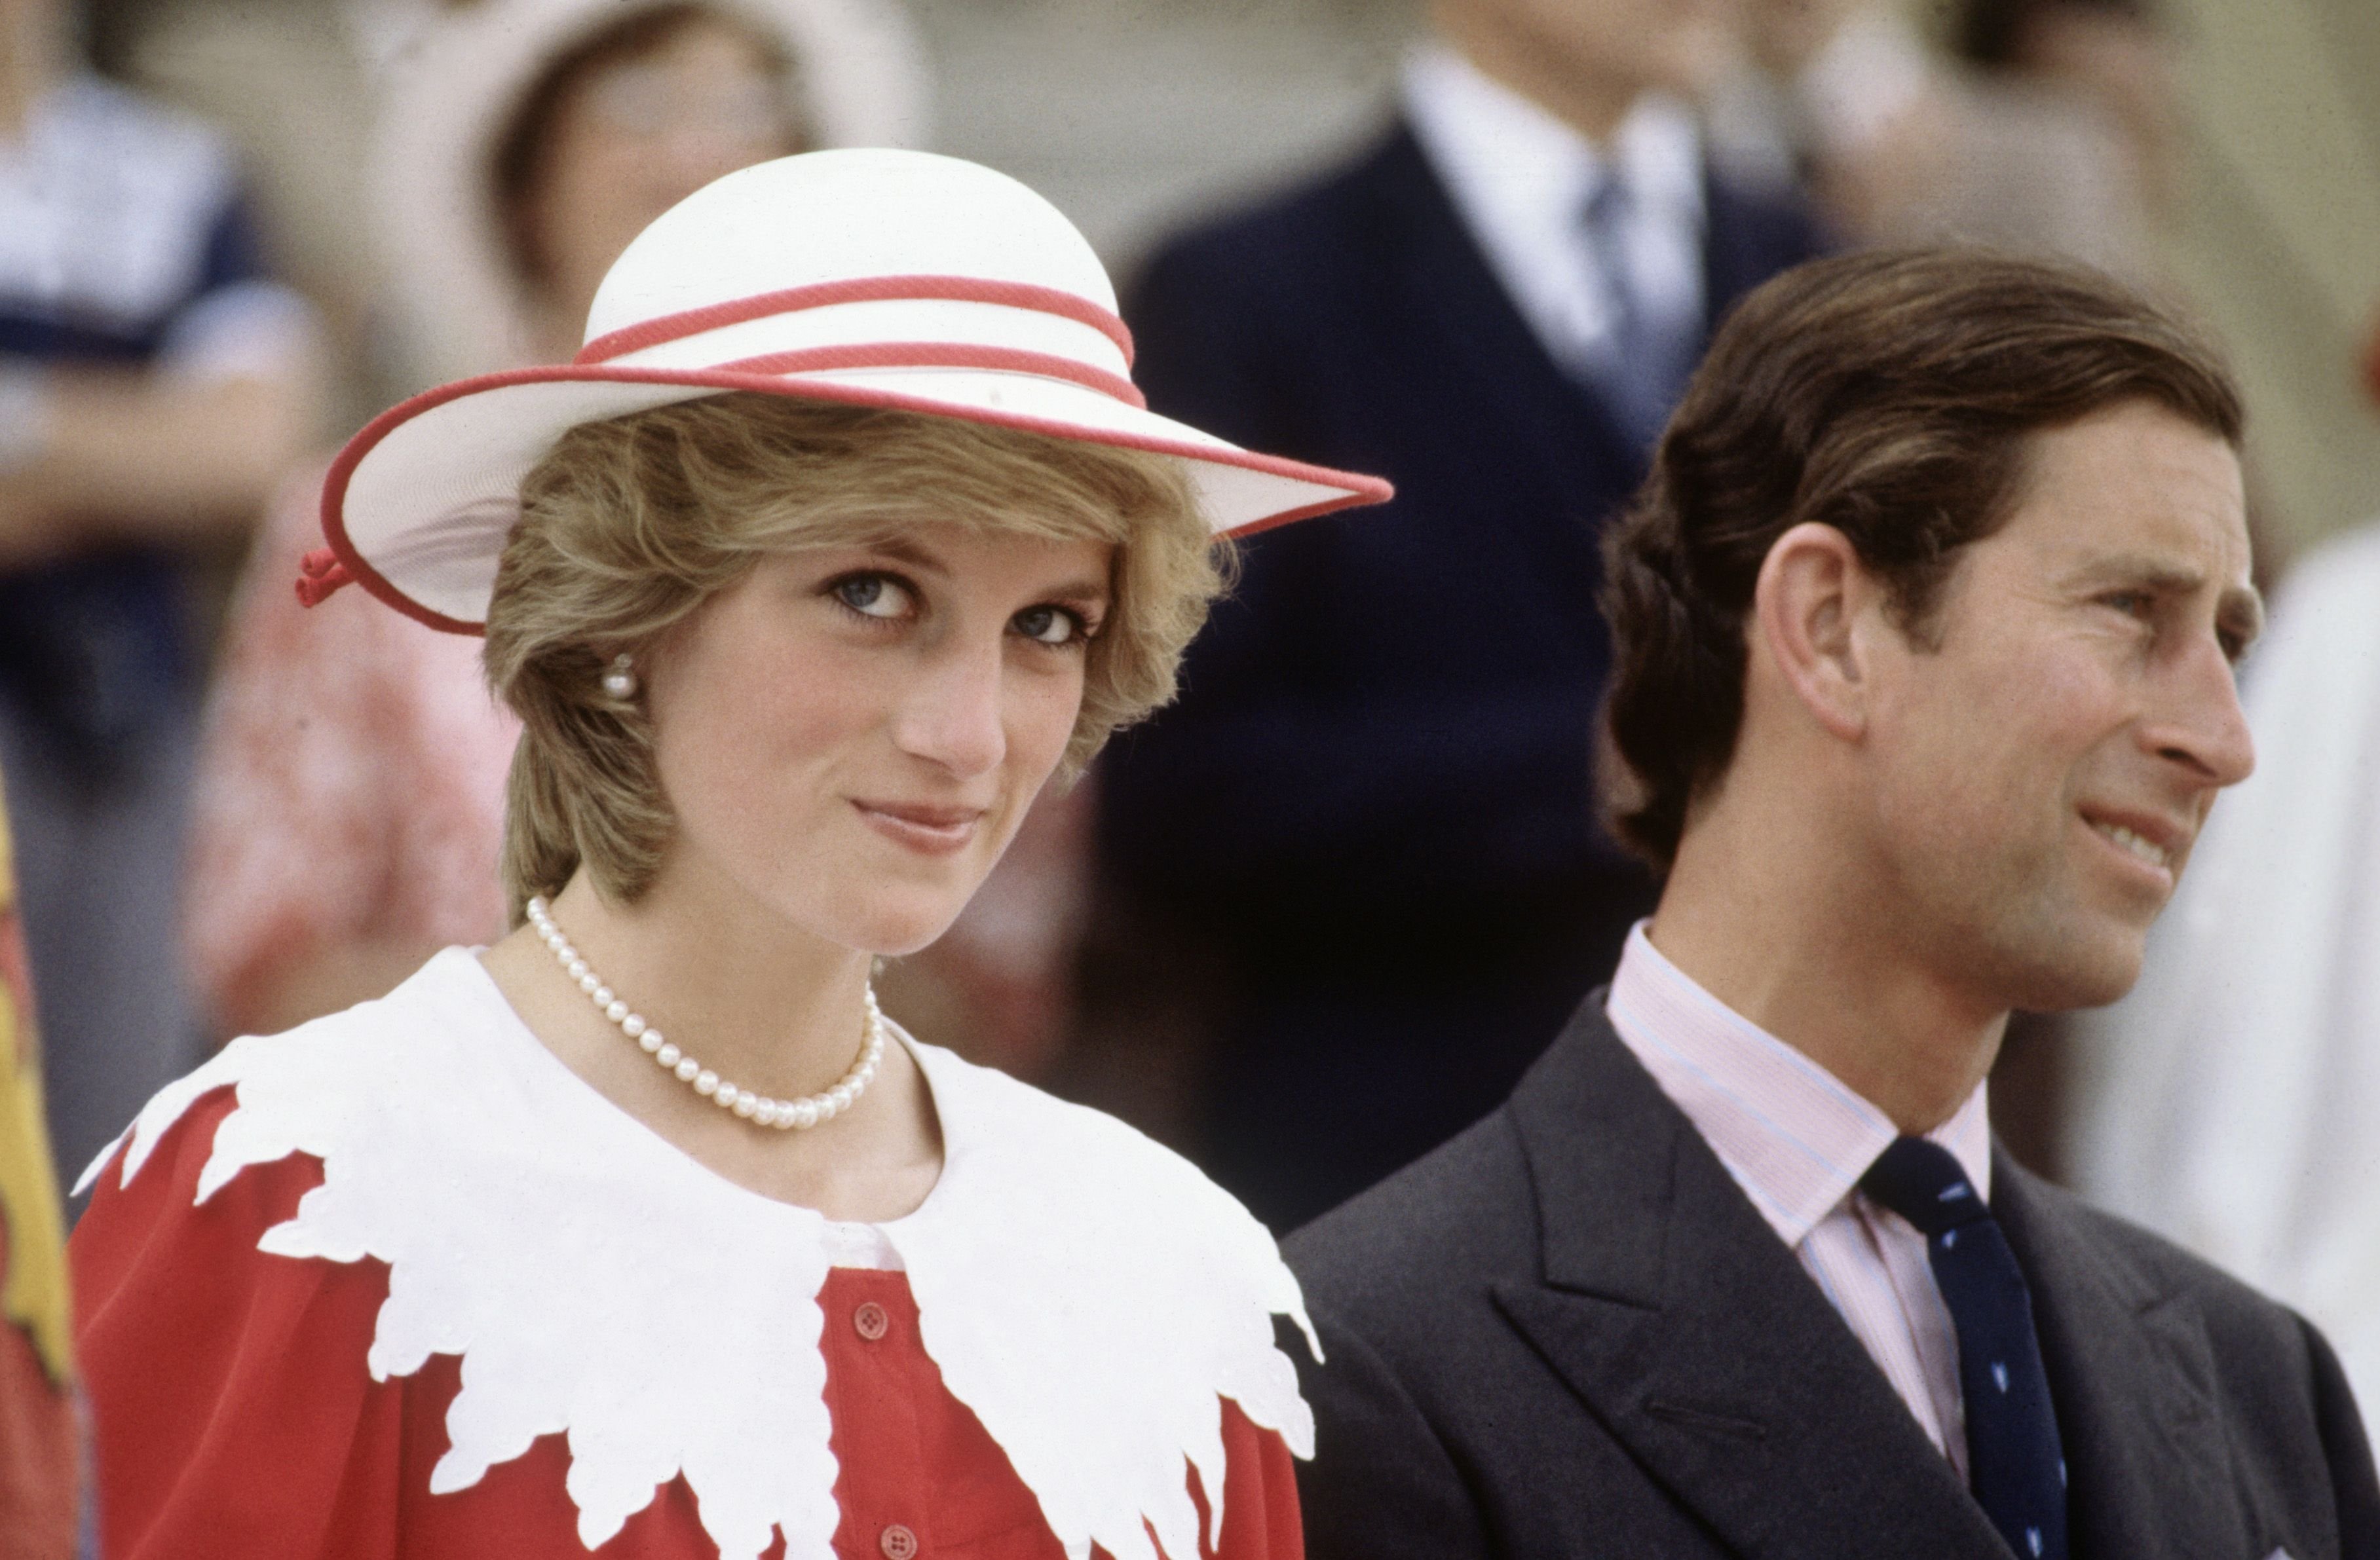 Princess Diana and Prince Charles during the Royal Tour of Canada on June 29, 1983, in Edmonton, Alberta, Canada | Photo: David Levenson/Getty Images